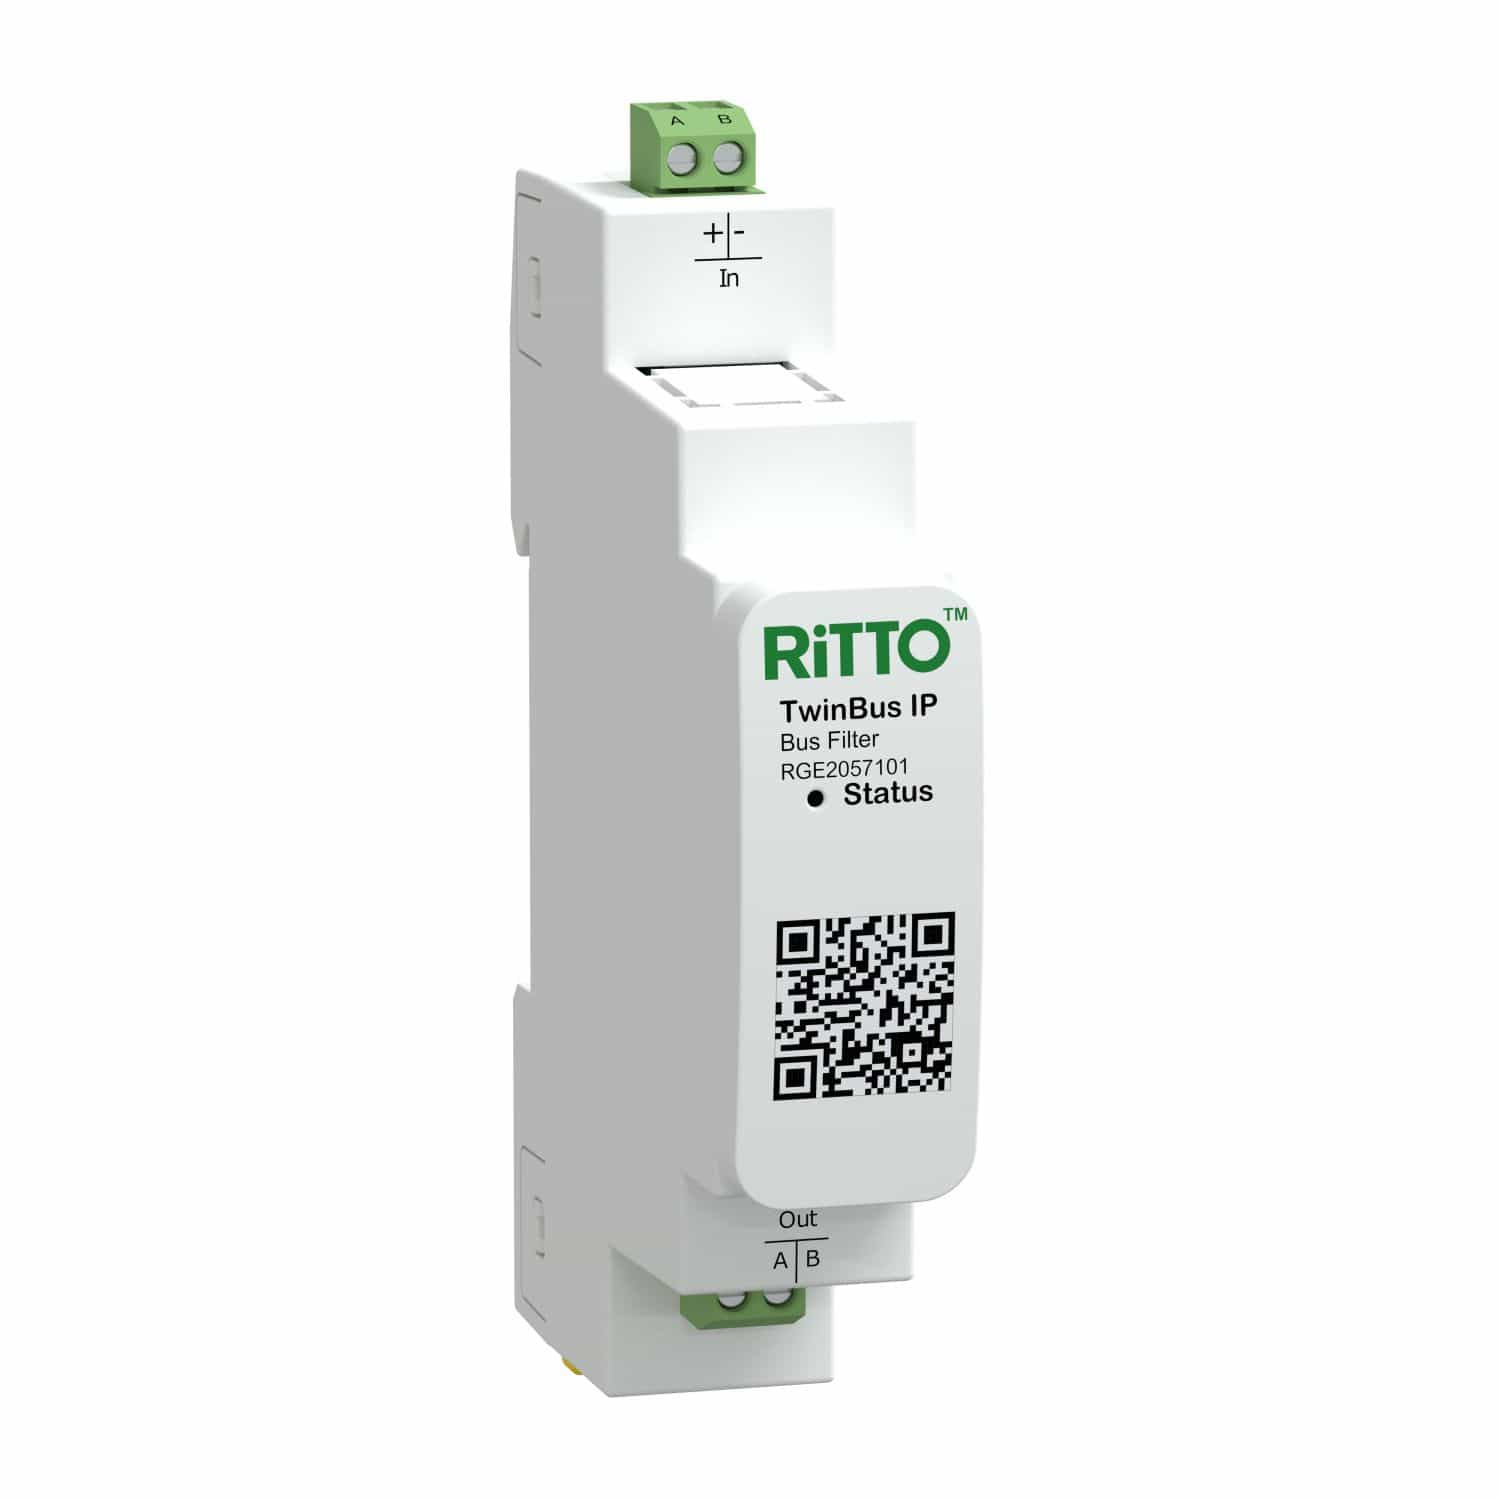 Ritto RGE2057101 Busfilter, TwinBus IP, weiß